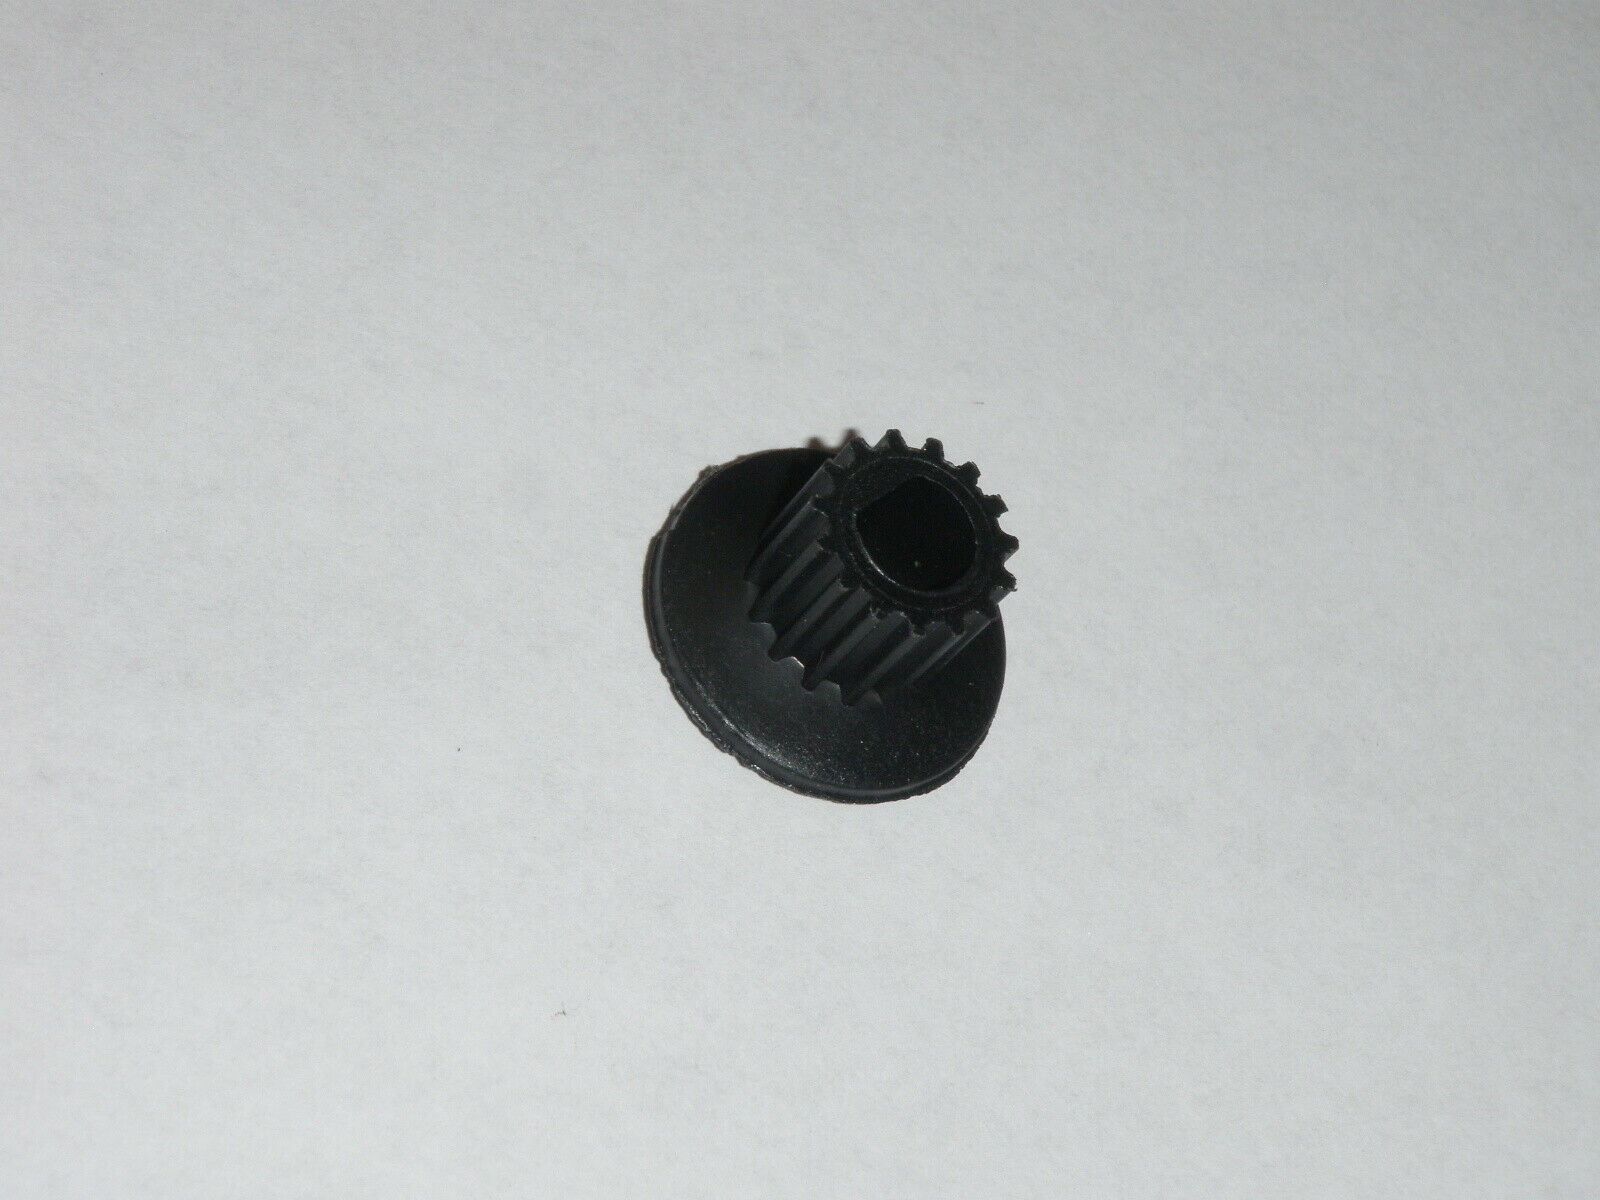 Primary image for Small Gear for Motor Shaft in Black and Decker Bread Maker Model B2250 only